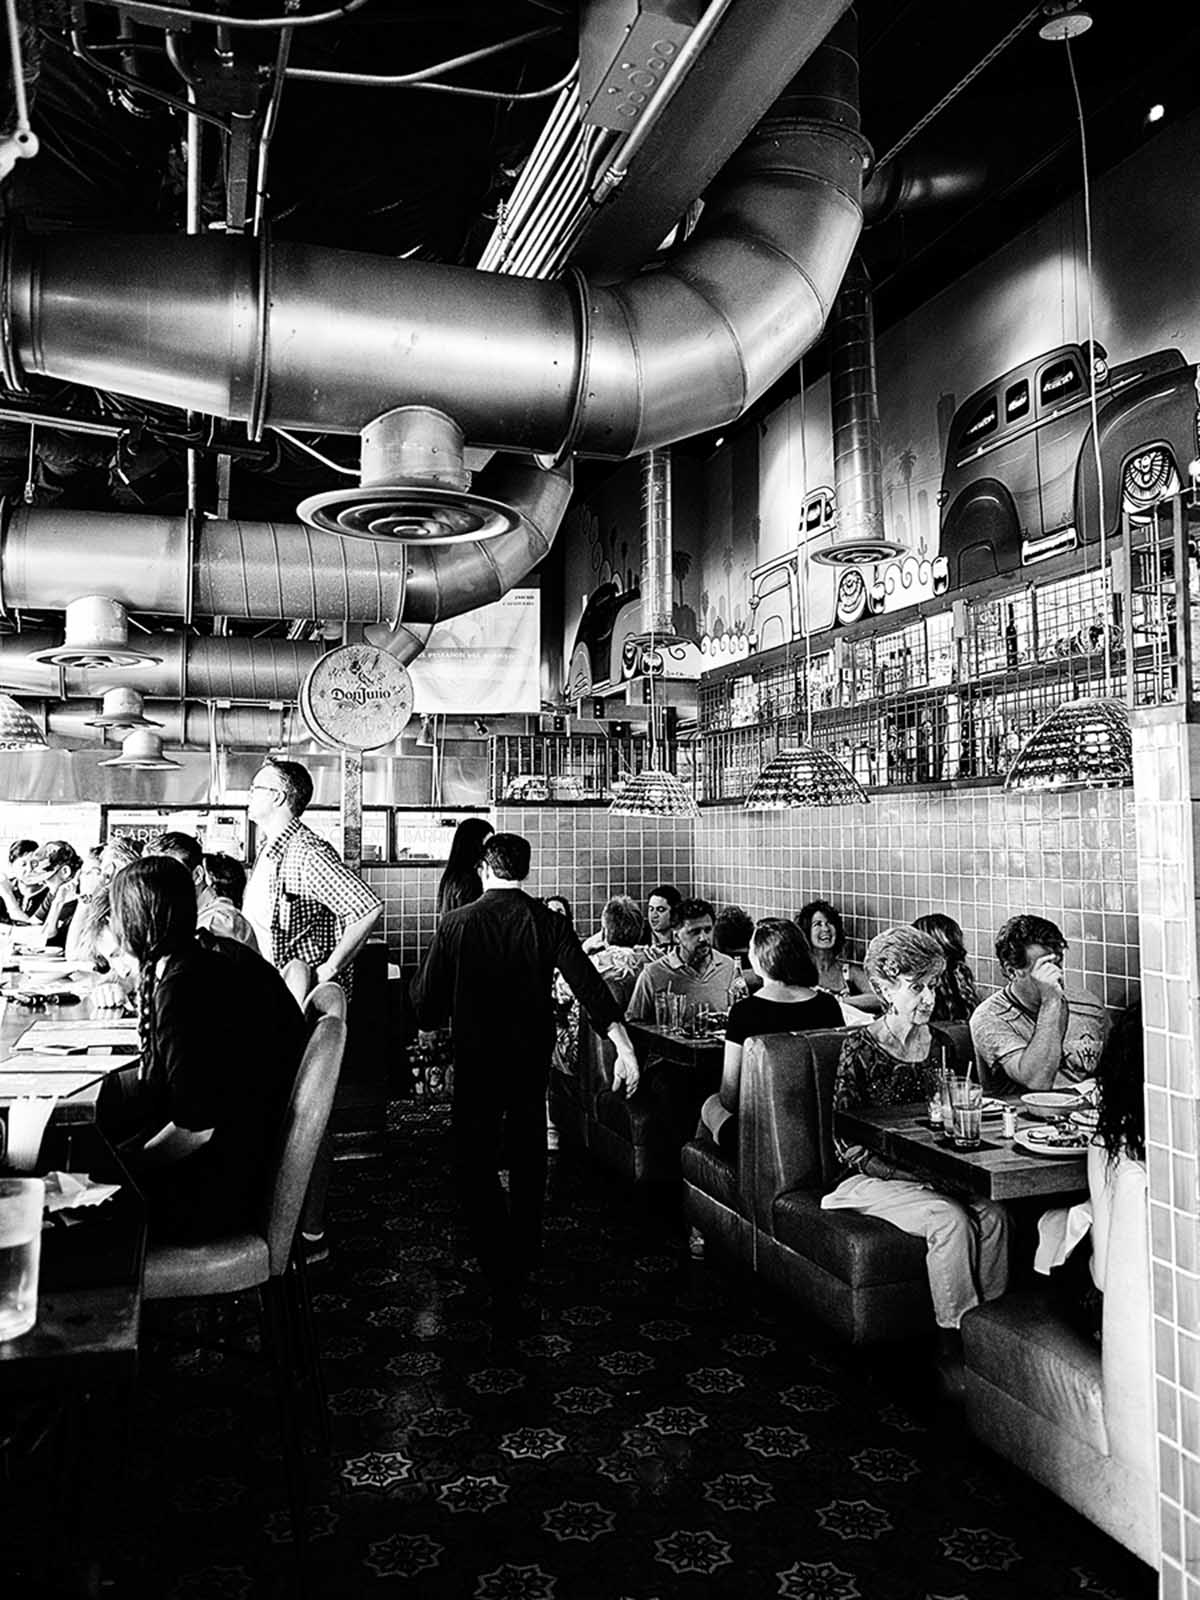 An image of a diner in black and white.